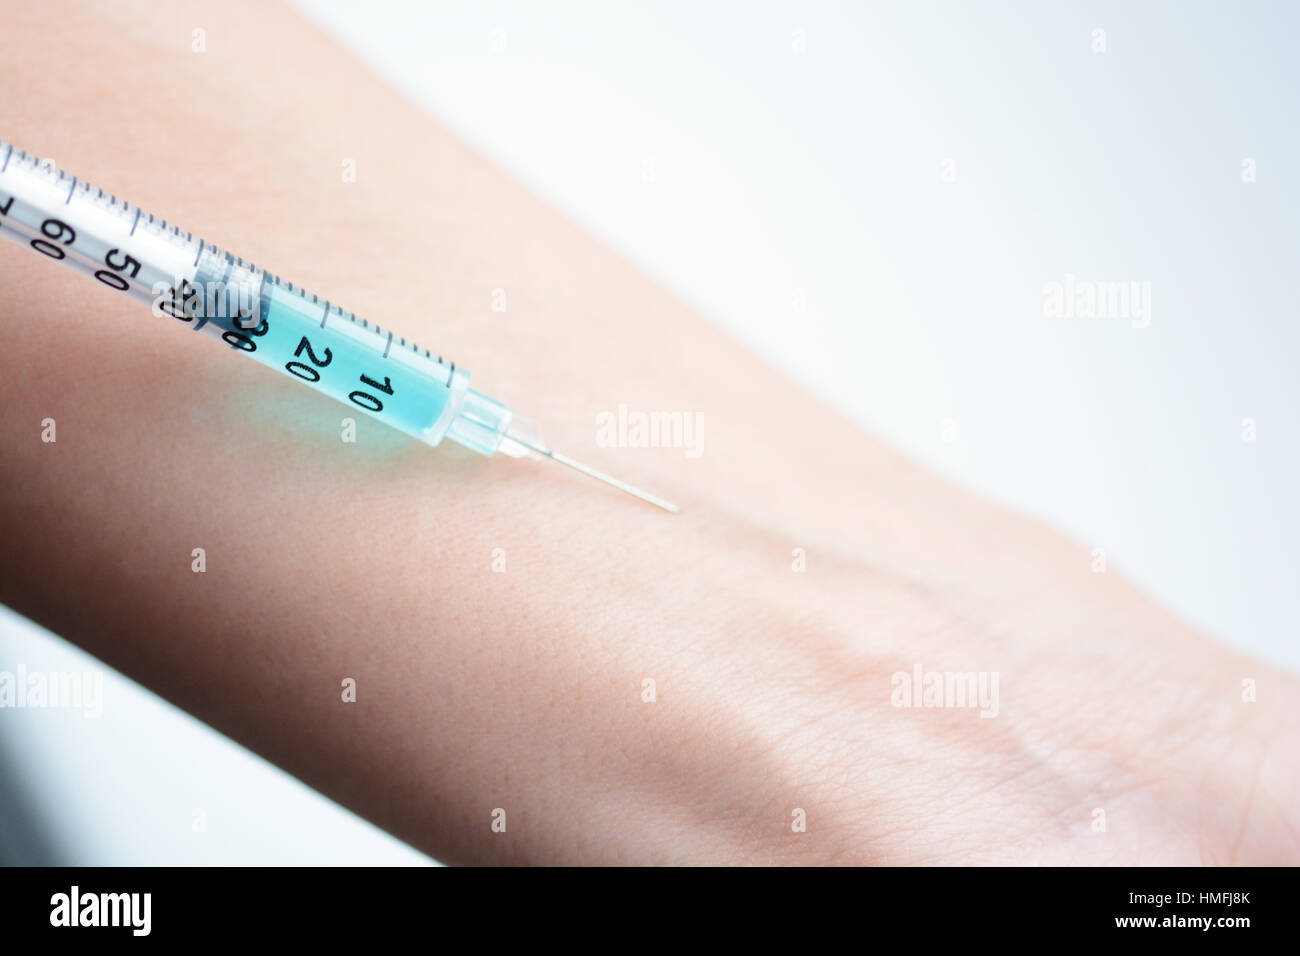 Close-up of a human arm getting an injection Stock Photo